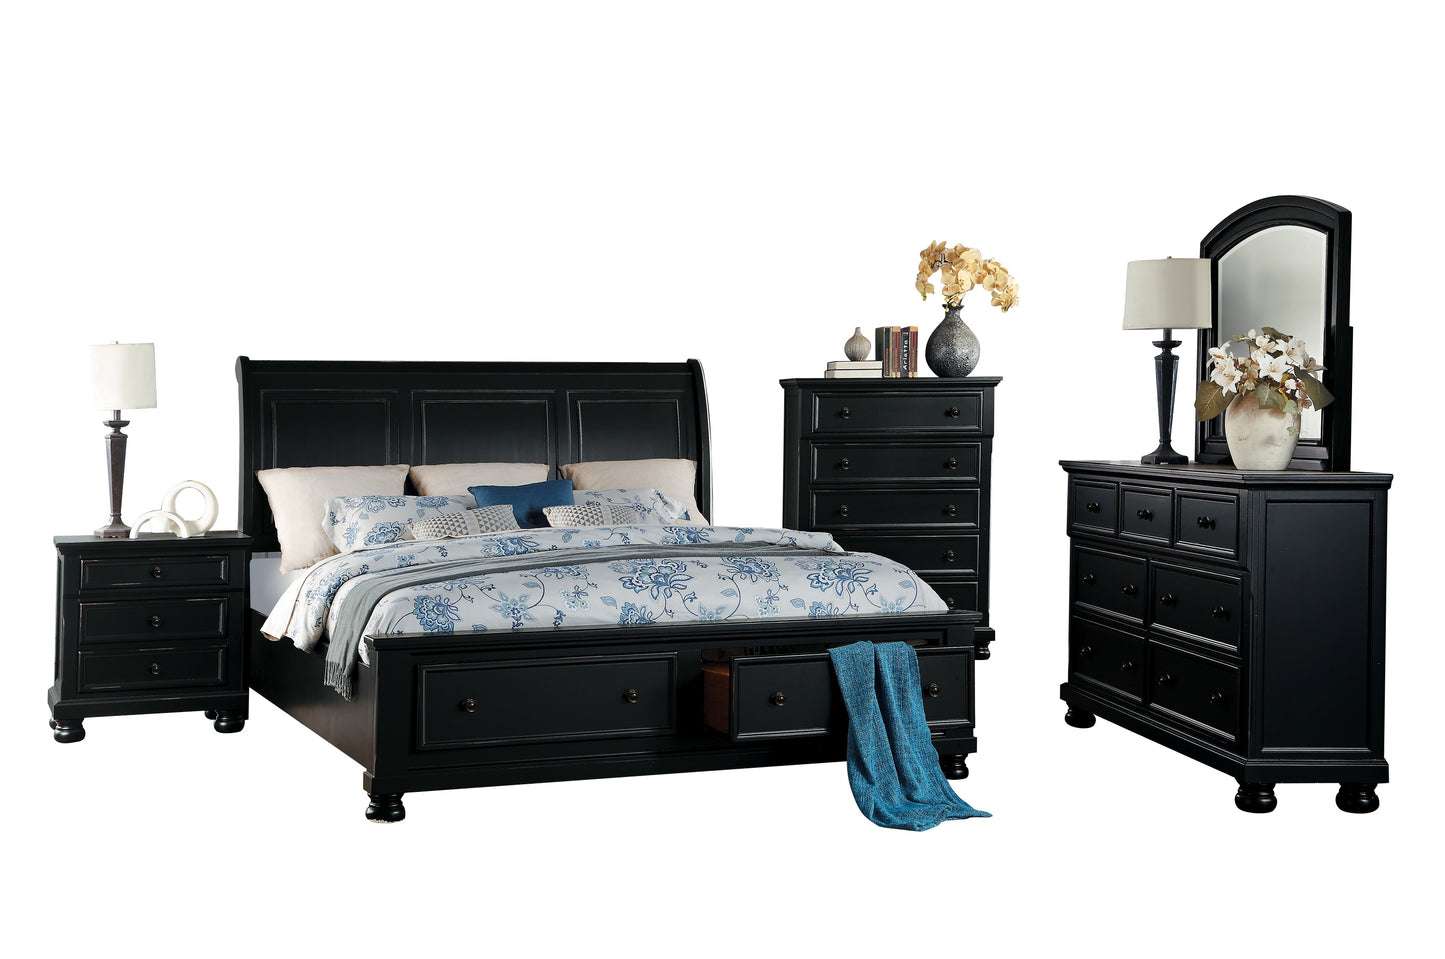 Lexington Cottage 5PC Bedroom Set Cal King Sleigh Storage Bed, Dresser, Mirror, Nightstand, Chest in Black